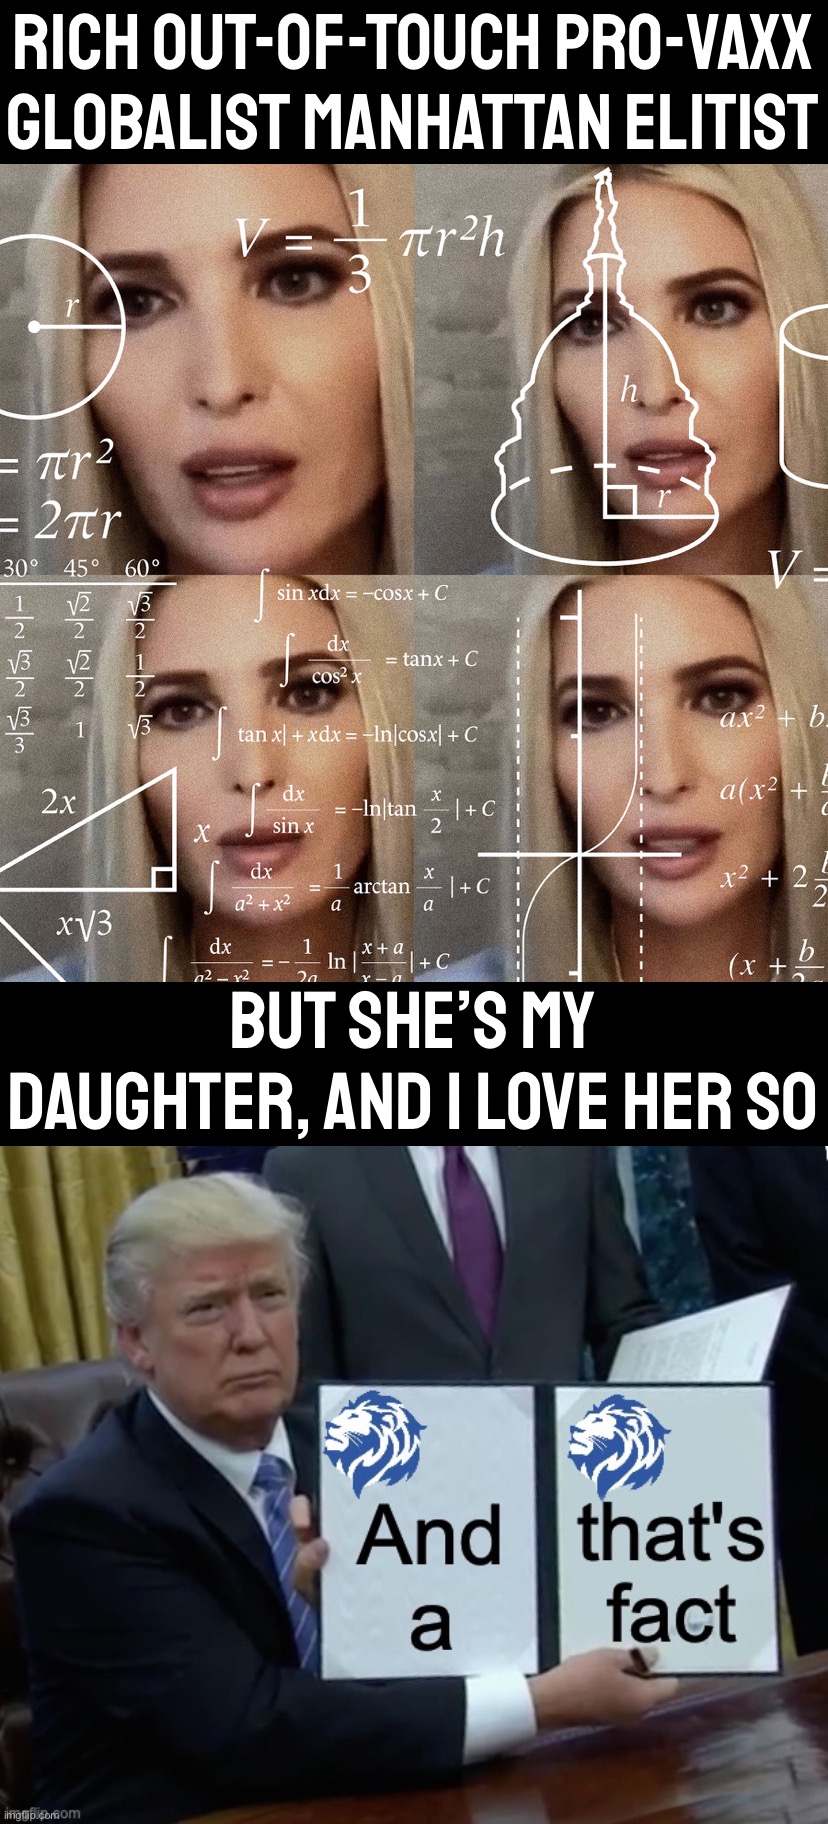 FAMILY IS EVERYTHING. WE HAVE SO MUCH LOVE WHEN THEY ARE LOYAL AND EARN OUR RESPECT. #FAMILY #TRUMP2024 #WINWITHUS #ORWATCHUSWIN | RICH OUT-OF-TOUCH PRO-VAXX GLOBALIST MANHATTAN ELITIST; BUT SHE’S MY DAUGHTER, AND I LOVE HER SO | image tagged in calculating ivanka trump,donald trump conservative party and that s a fact,family,ivanka trump,trump 2024,respect | made w/ Imgflip meme maker